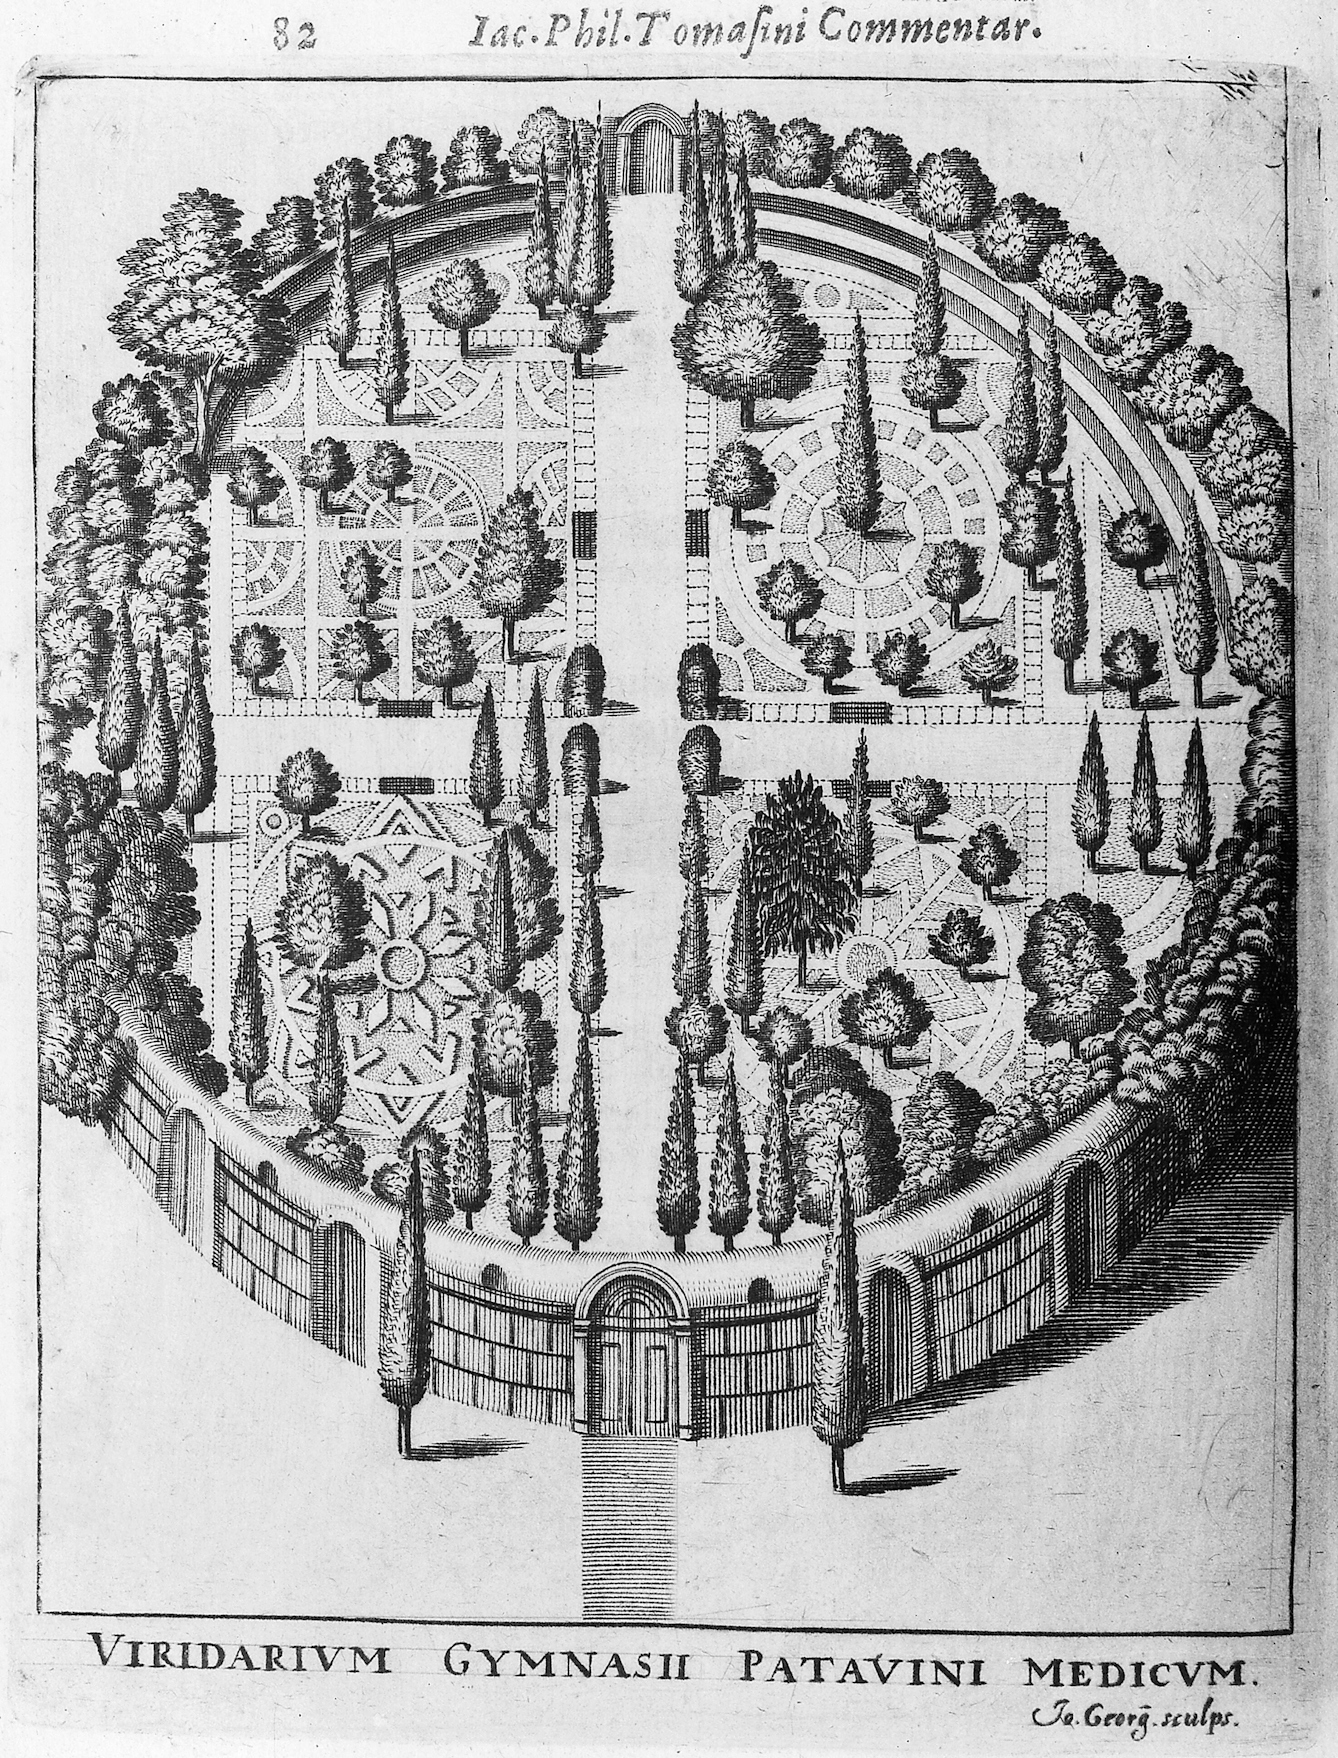 Black and white illustration showing the circular layout of a formal-looking garden, surrounded by walls, trees and shrubs.